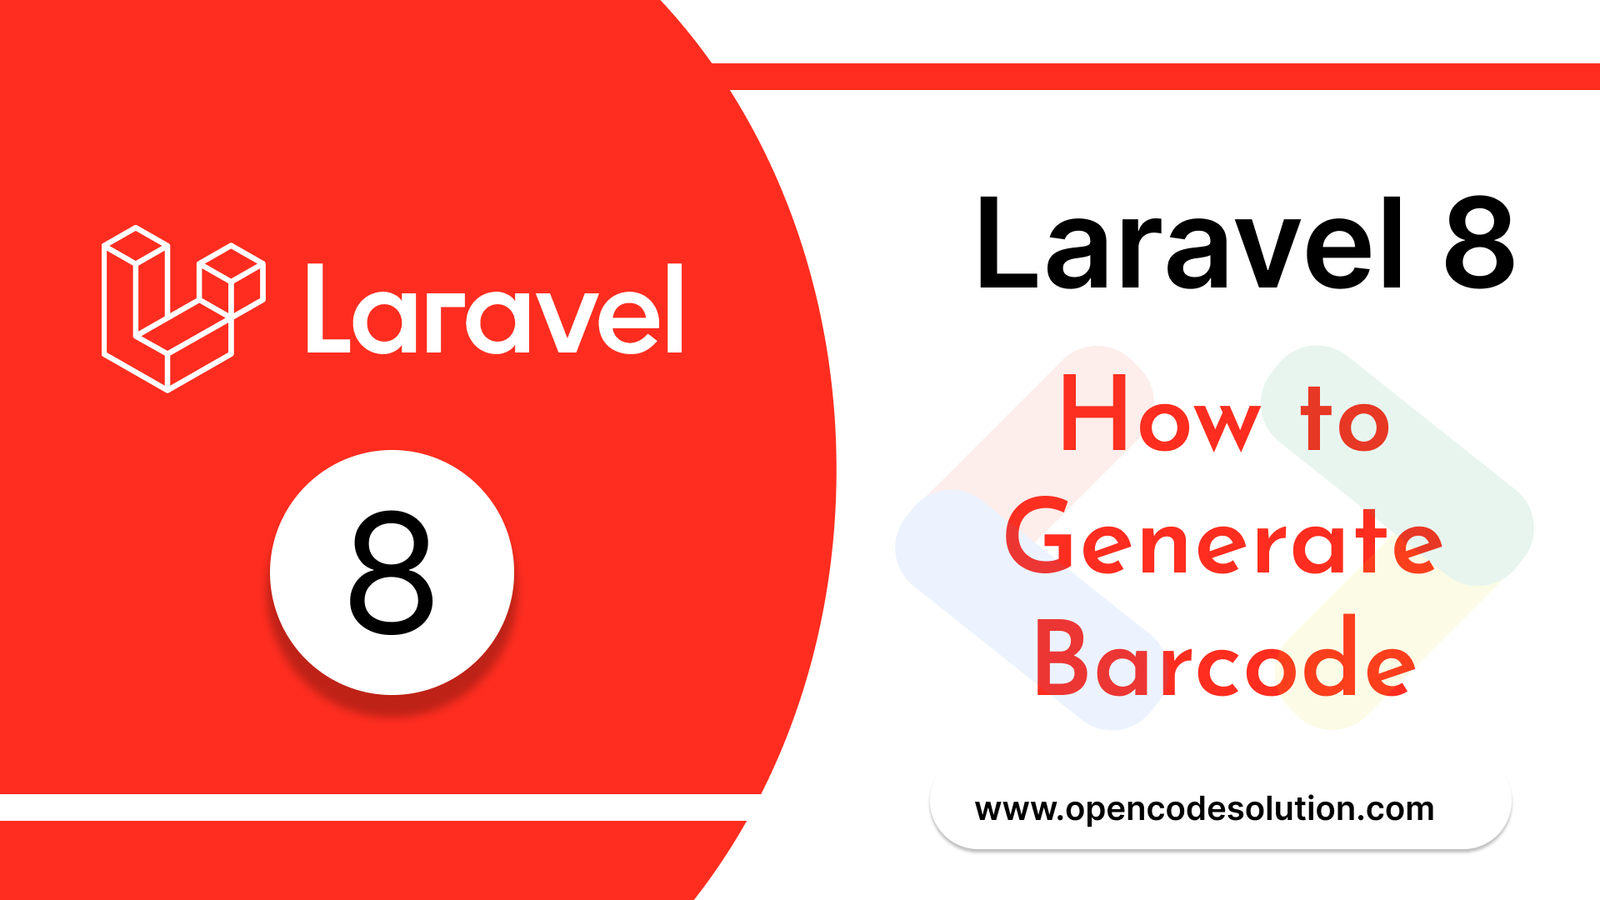 How to Generate Barcode in Laravel 8?